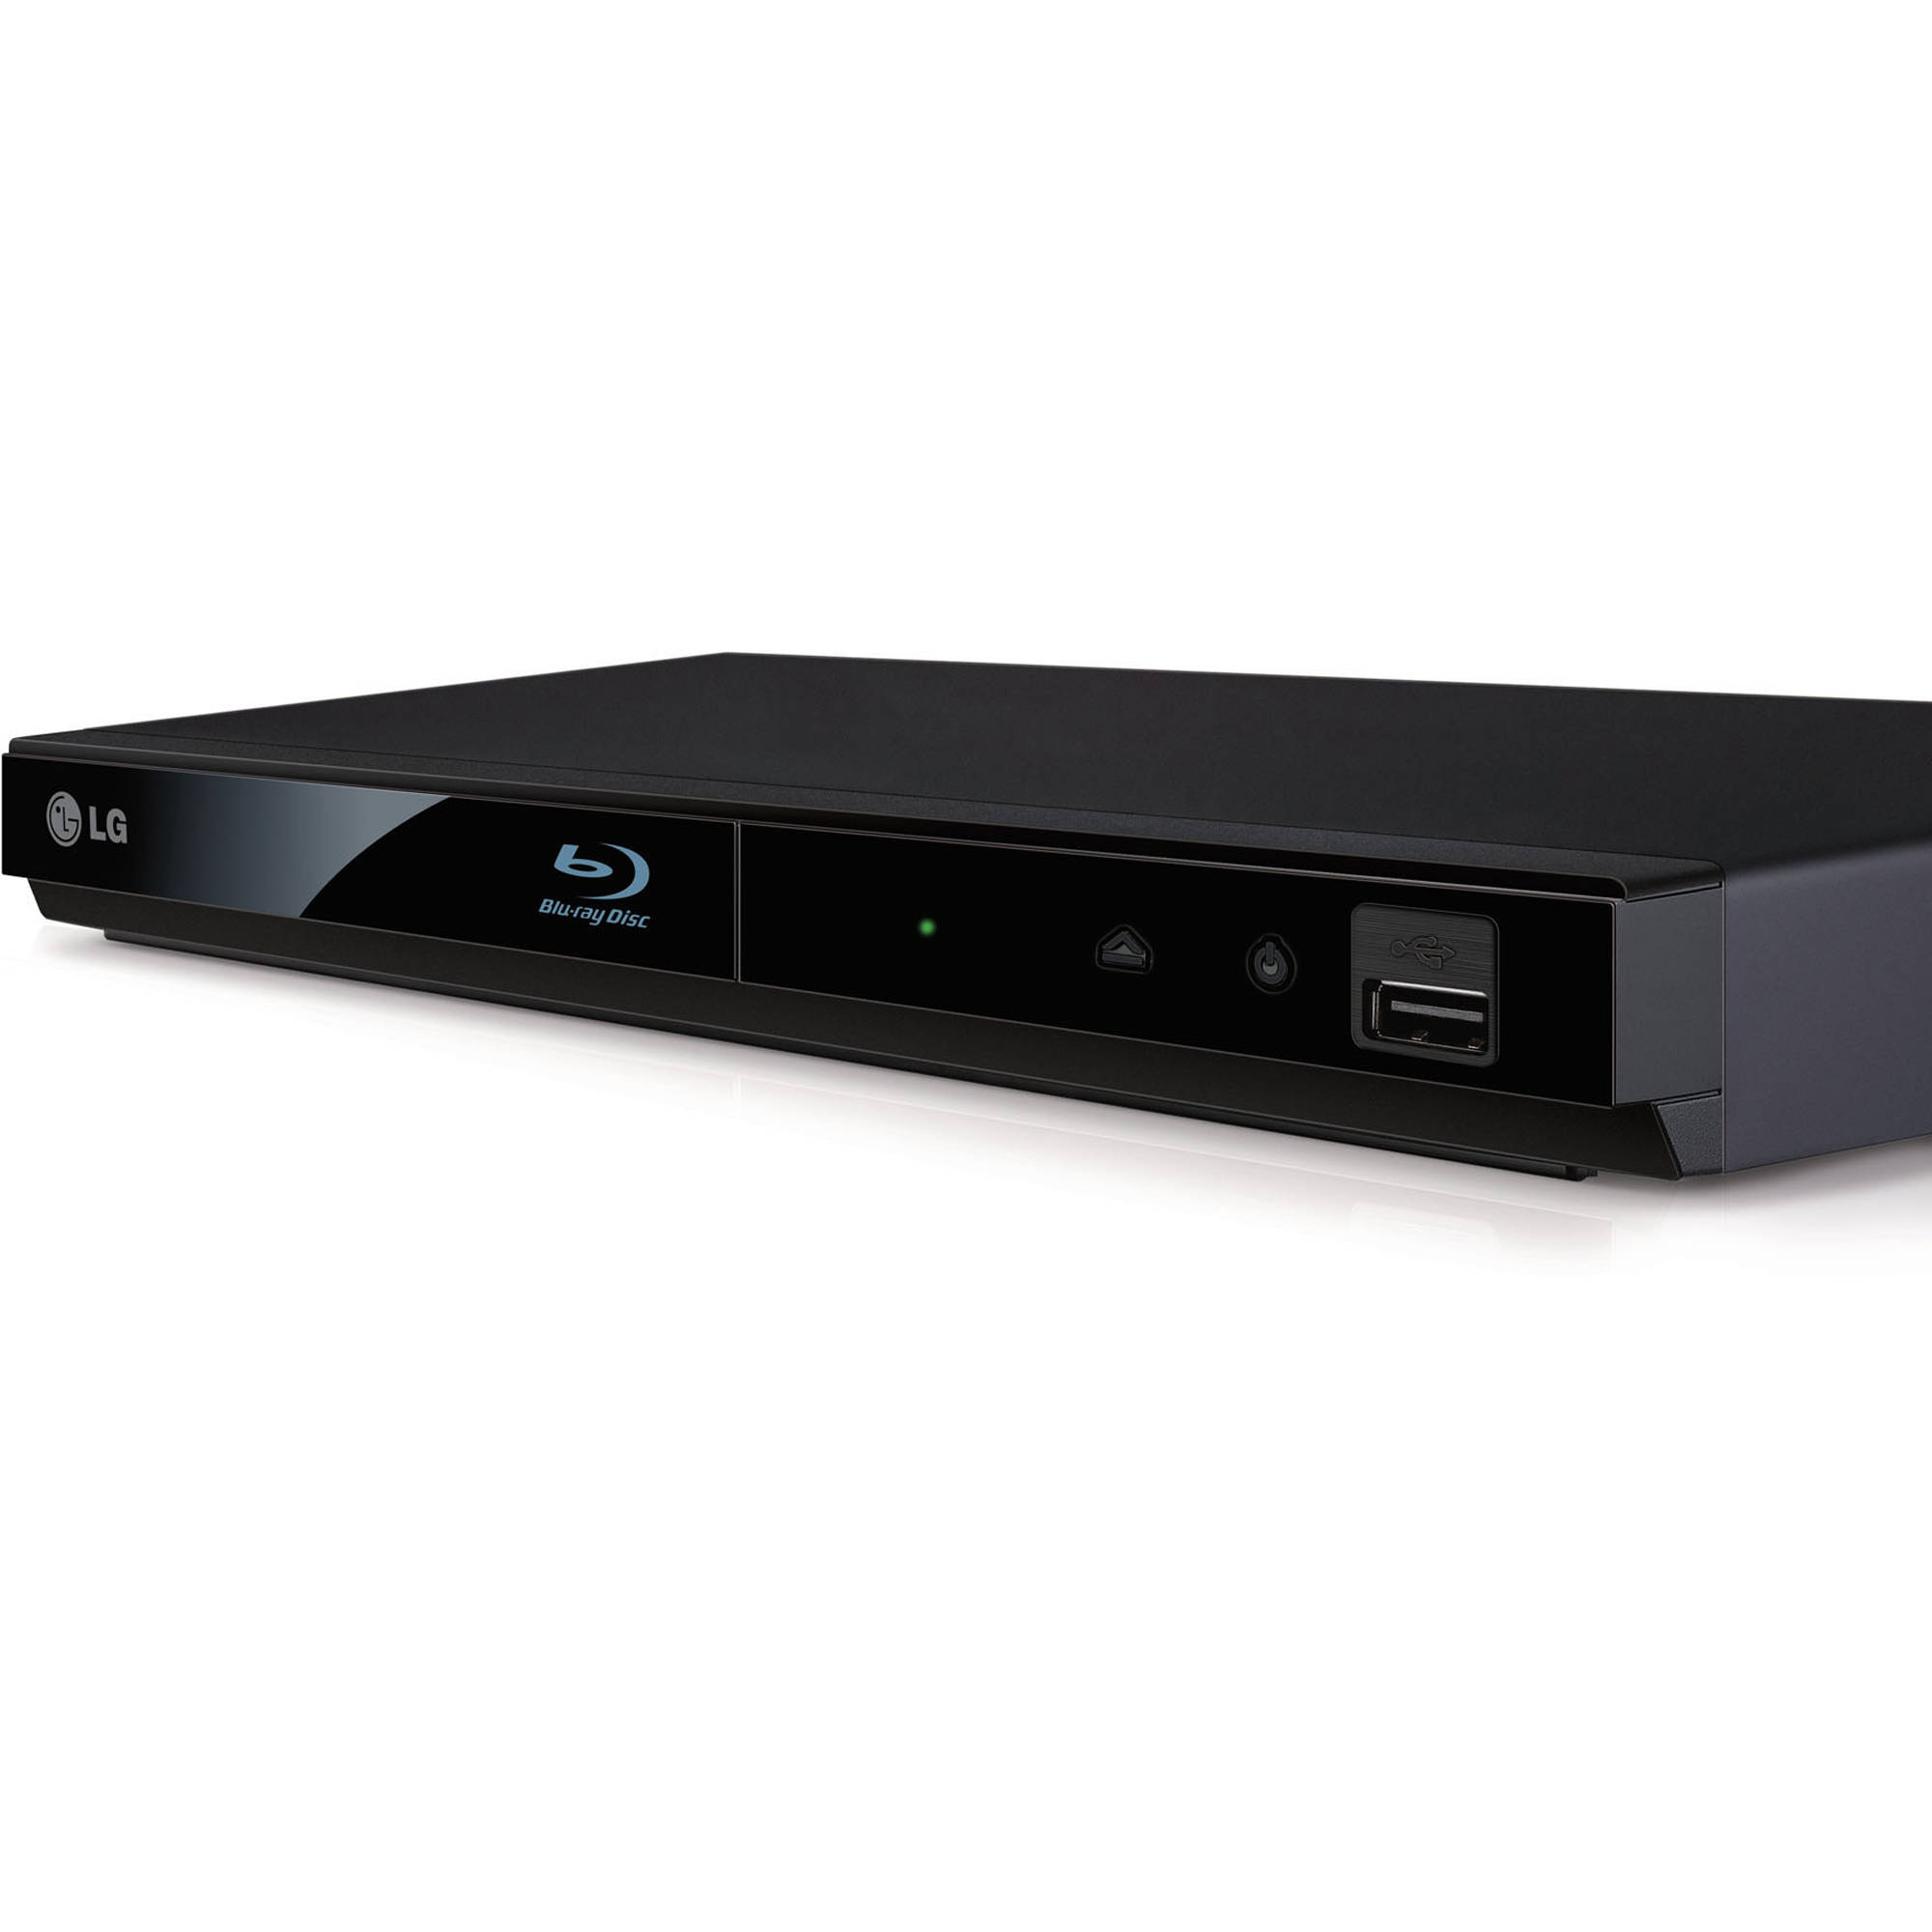 LG BP145 2D Blu-ray Player - image 1 of 2